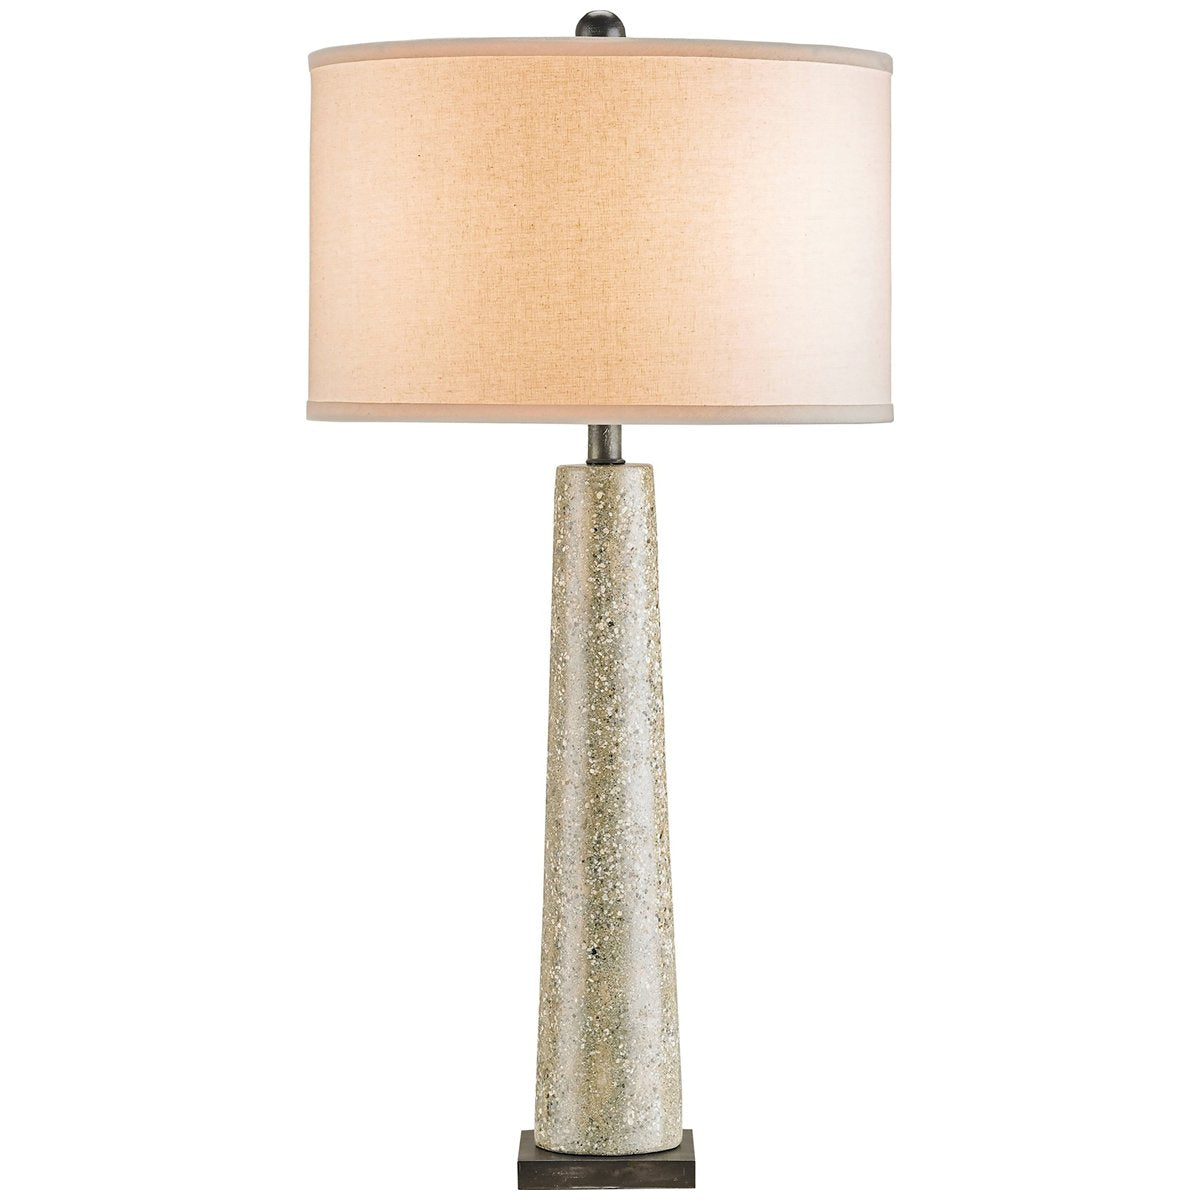 Currey and Company Epigram Table Lamp